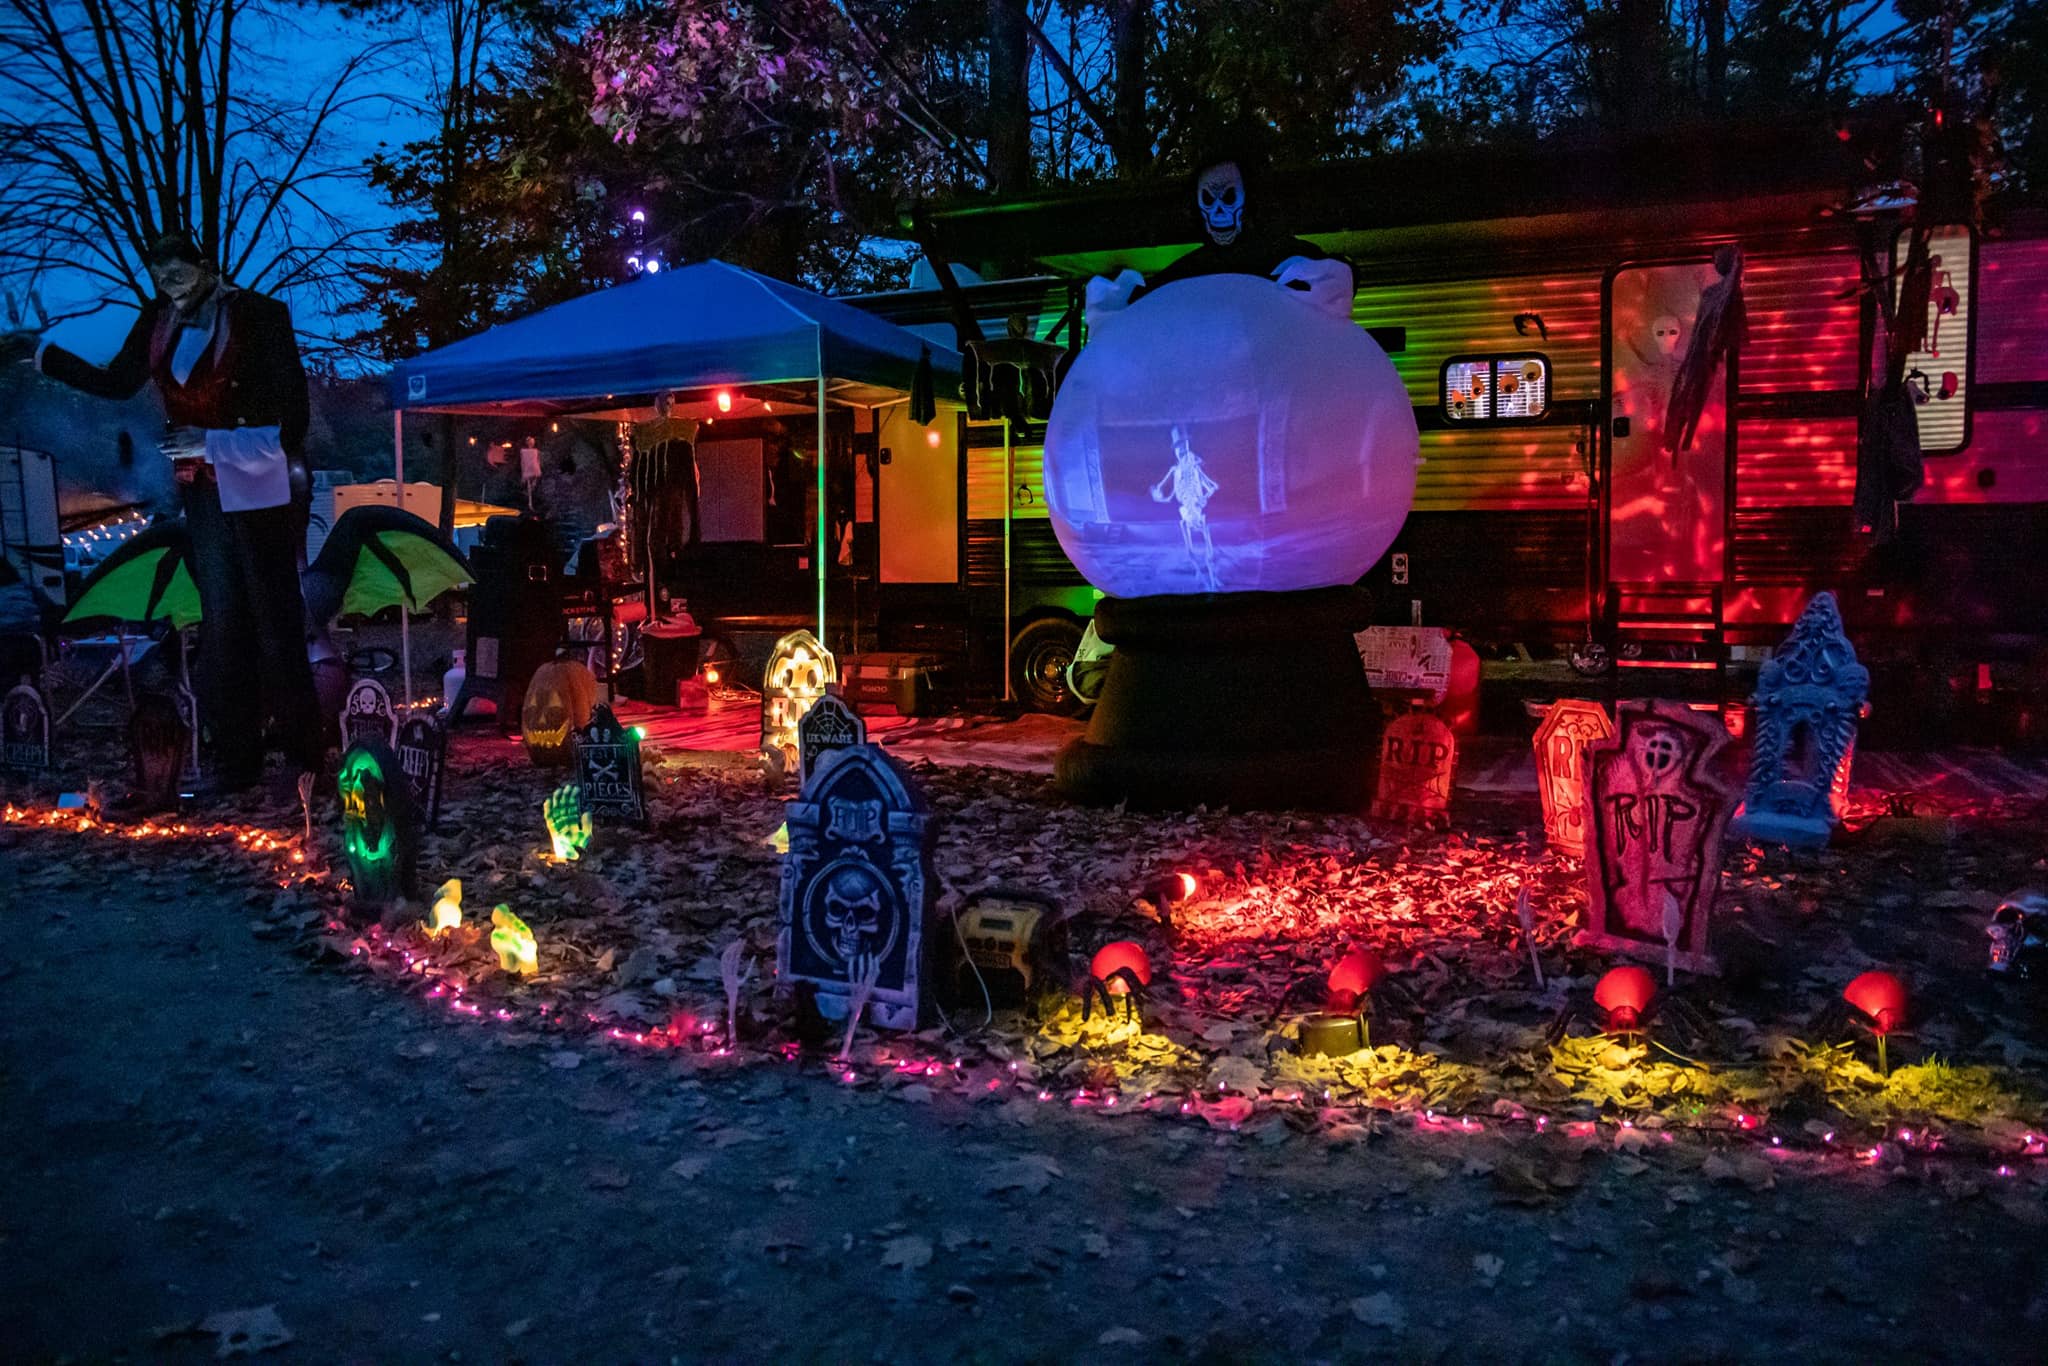 campers decorated for halloween and the trick or treating and pavilion games